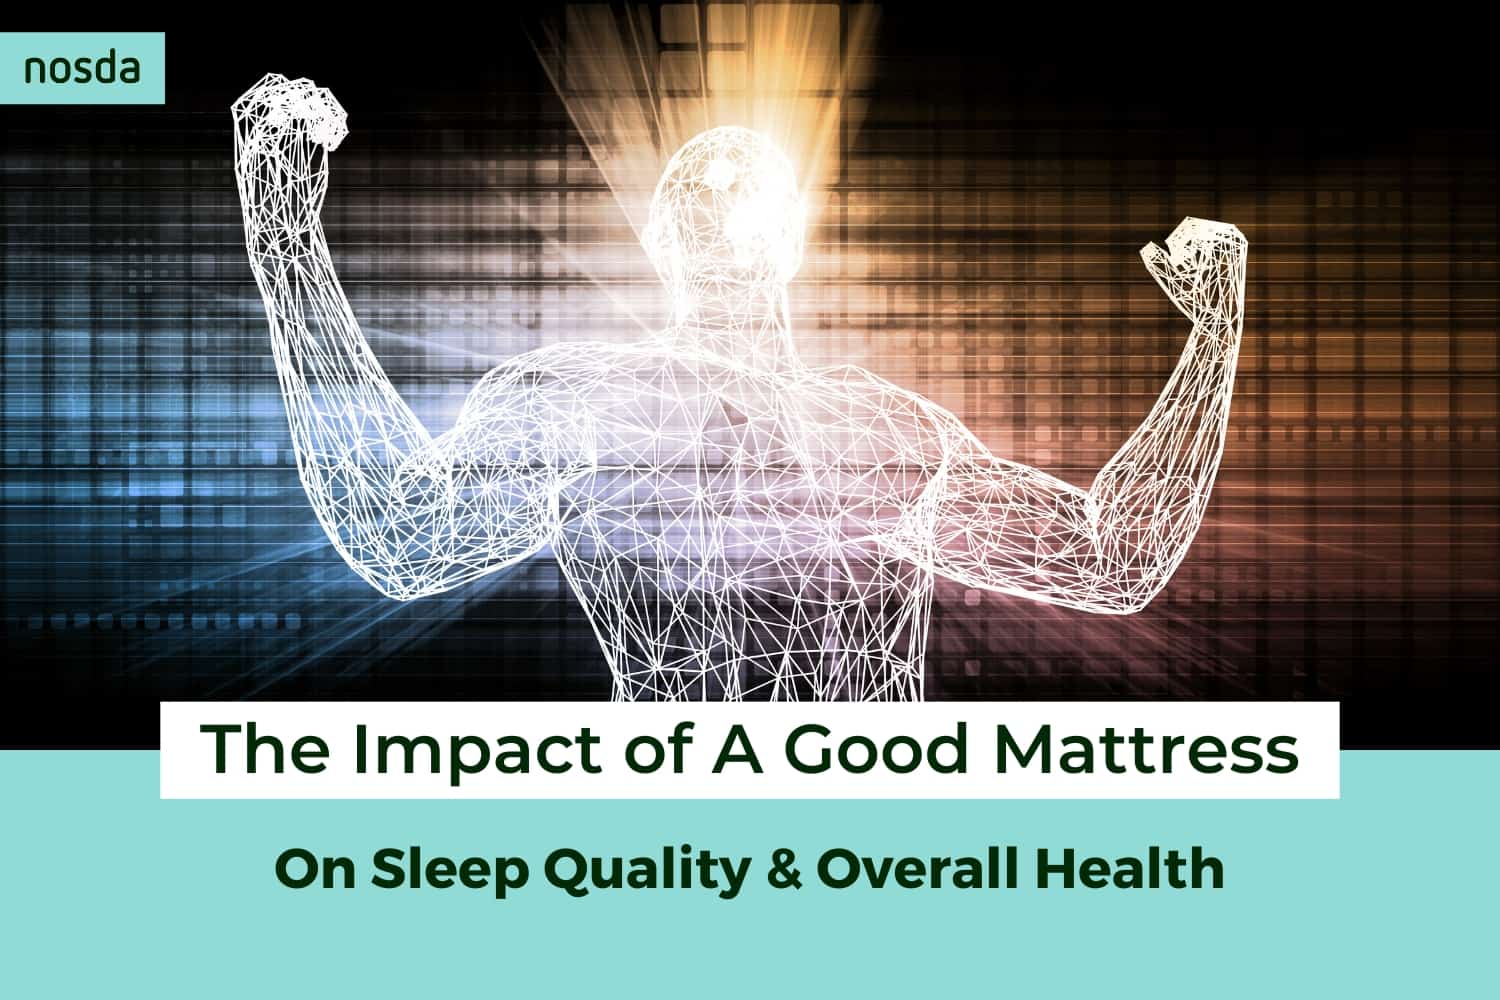 The Impact of A Good Mattress on Sleep Quality and Overall Health